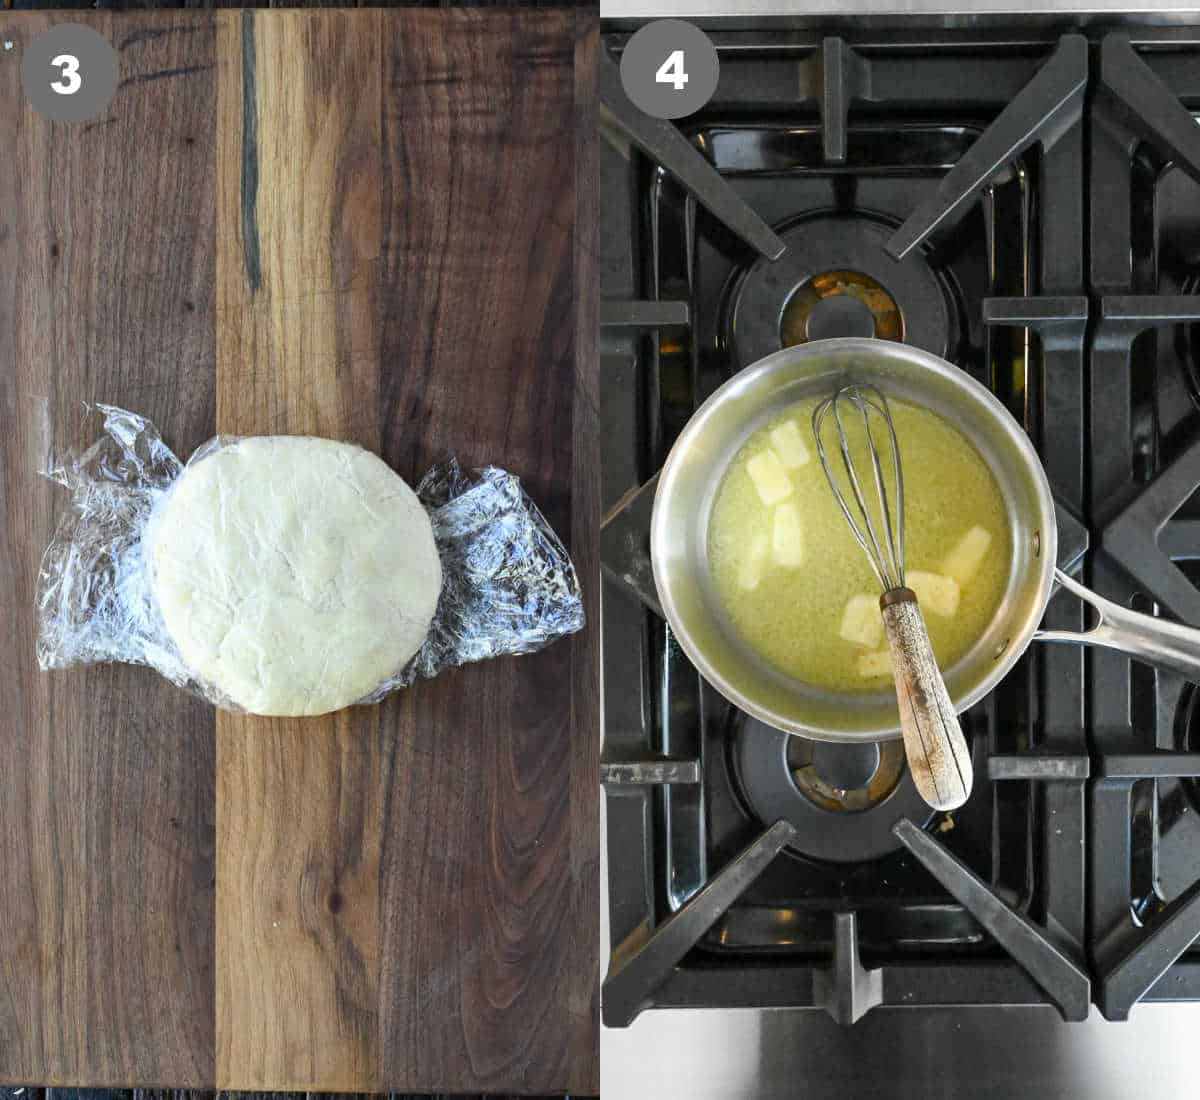 Pie crust wrapped and butter melted in a saucepan.